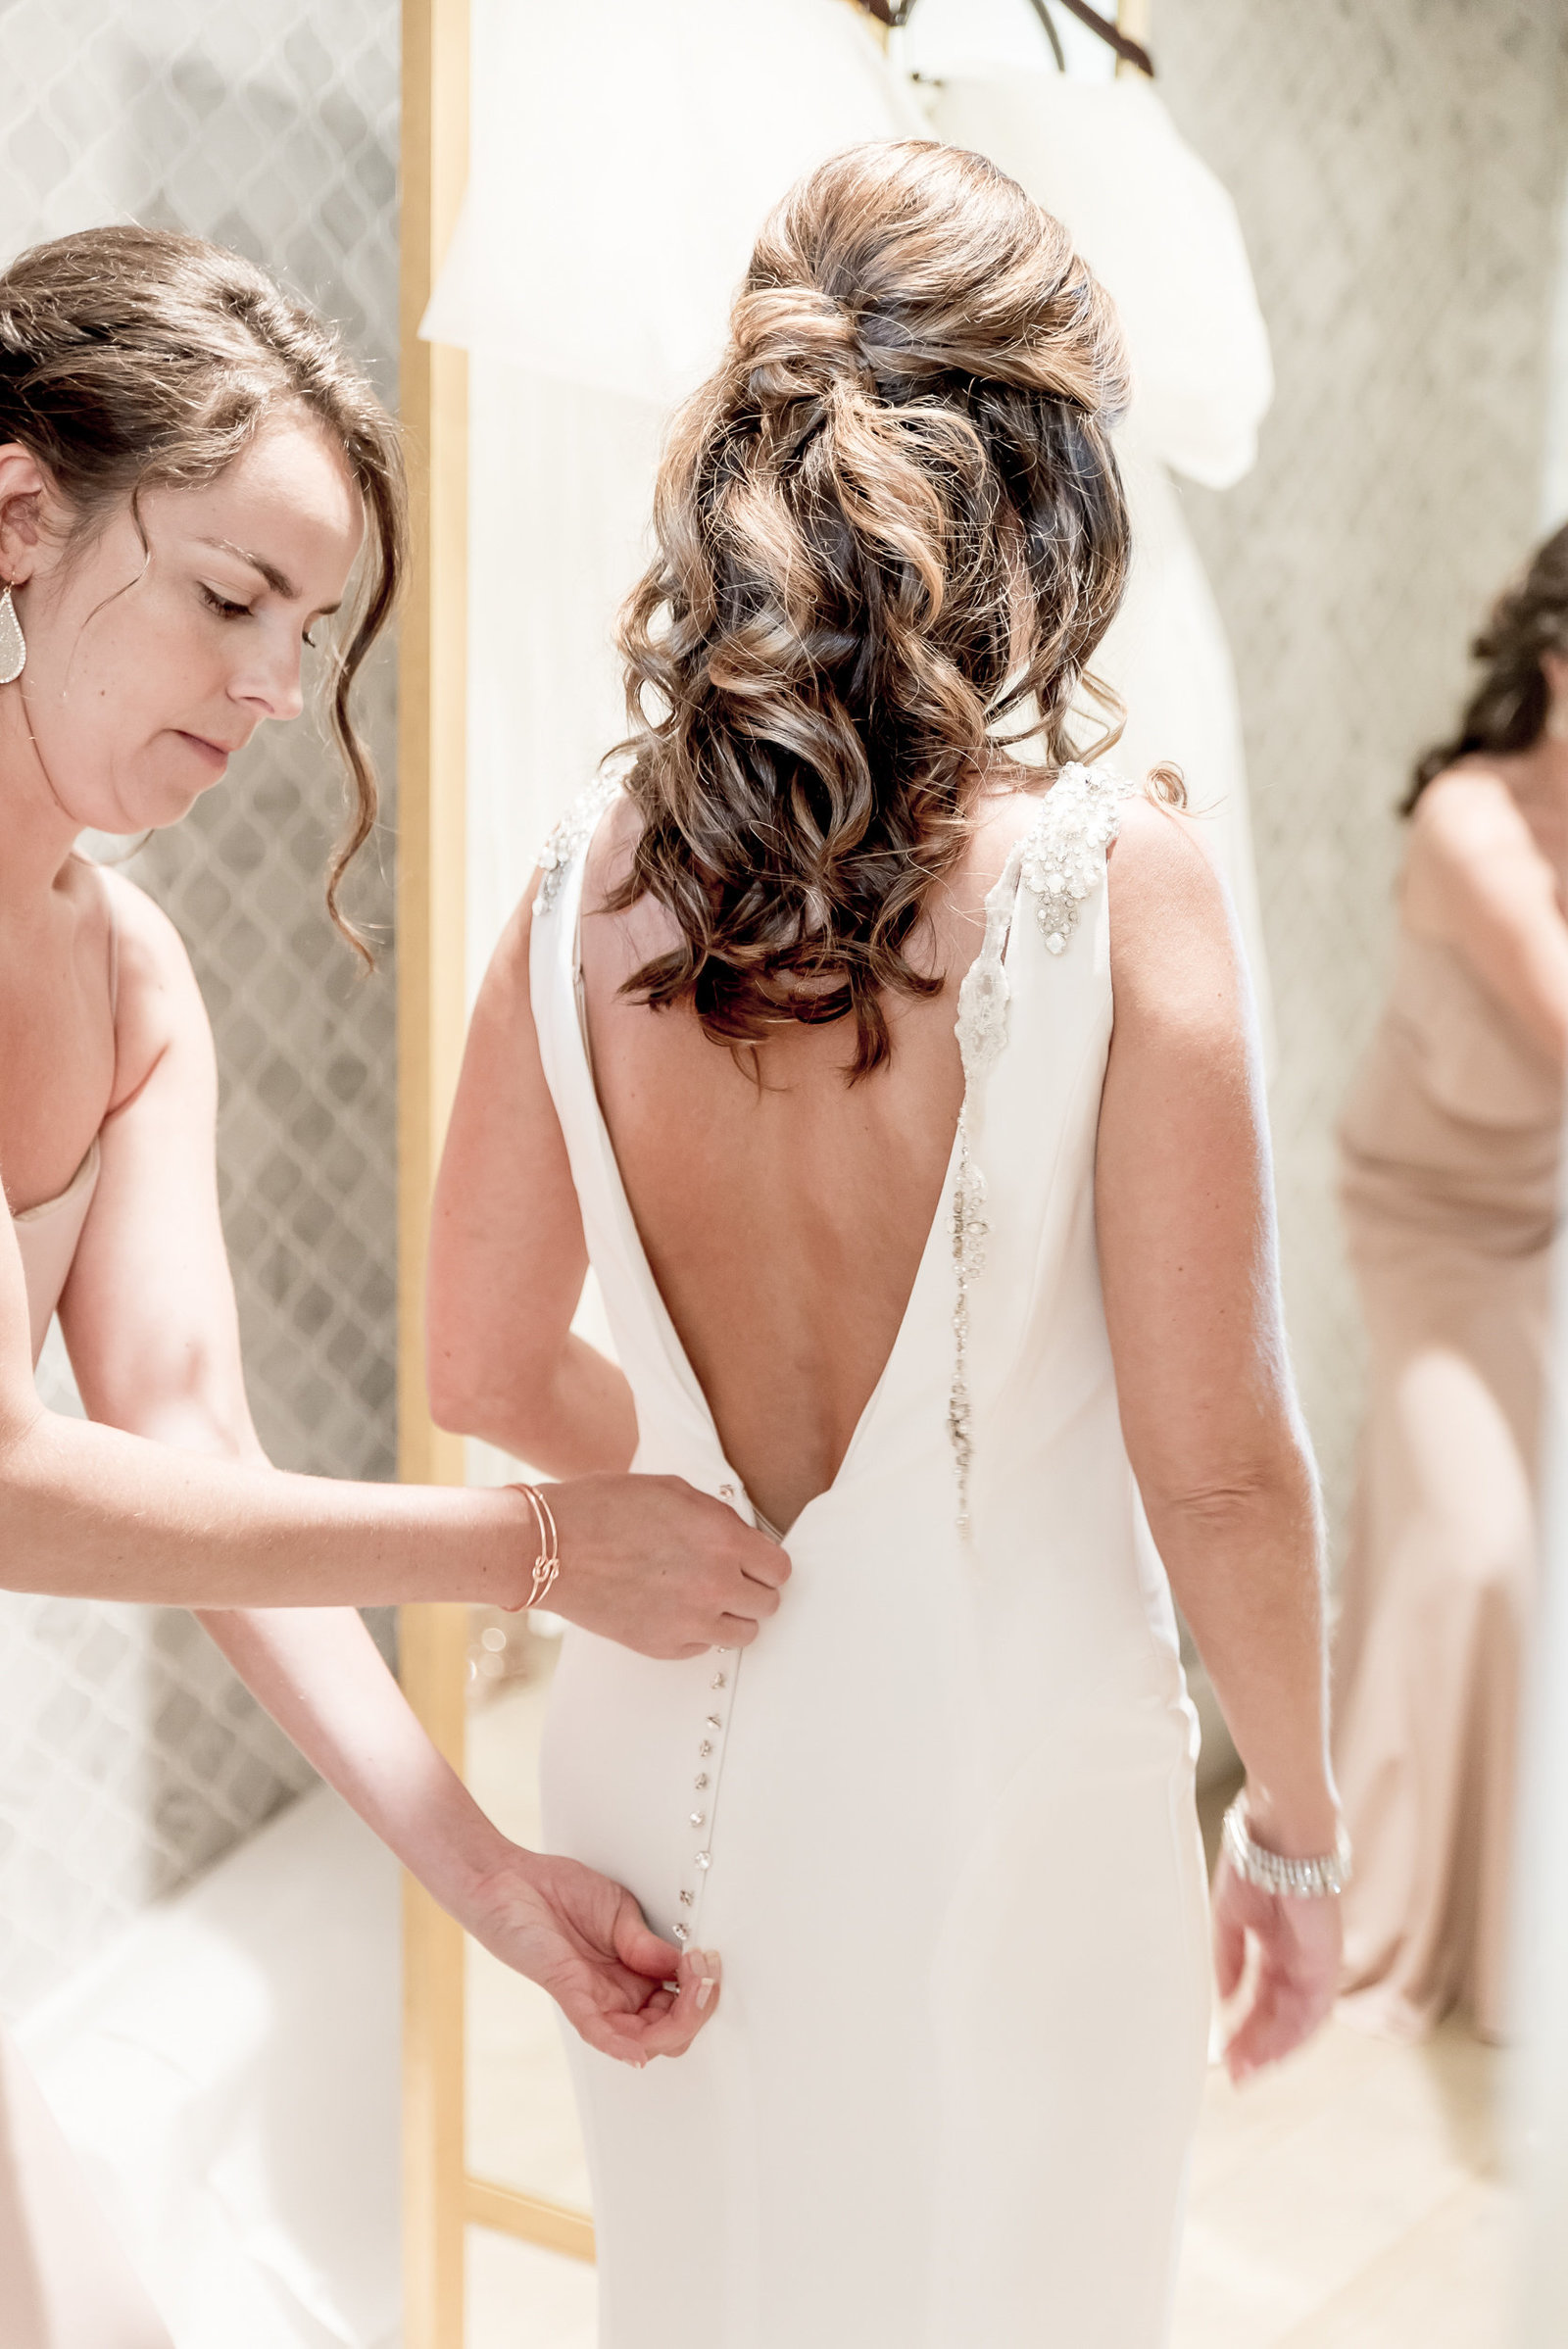 Bride getting her dress zipped by a bridesmaid